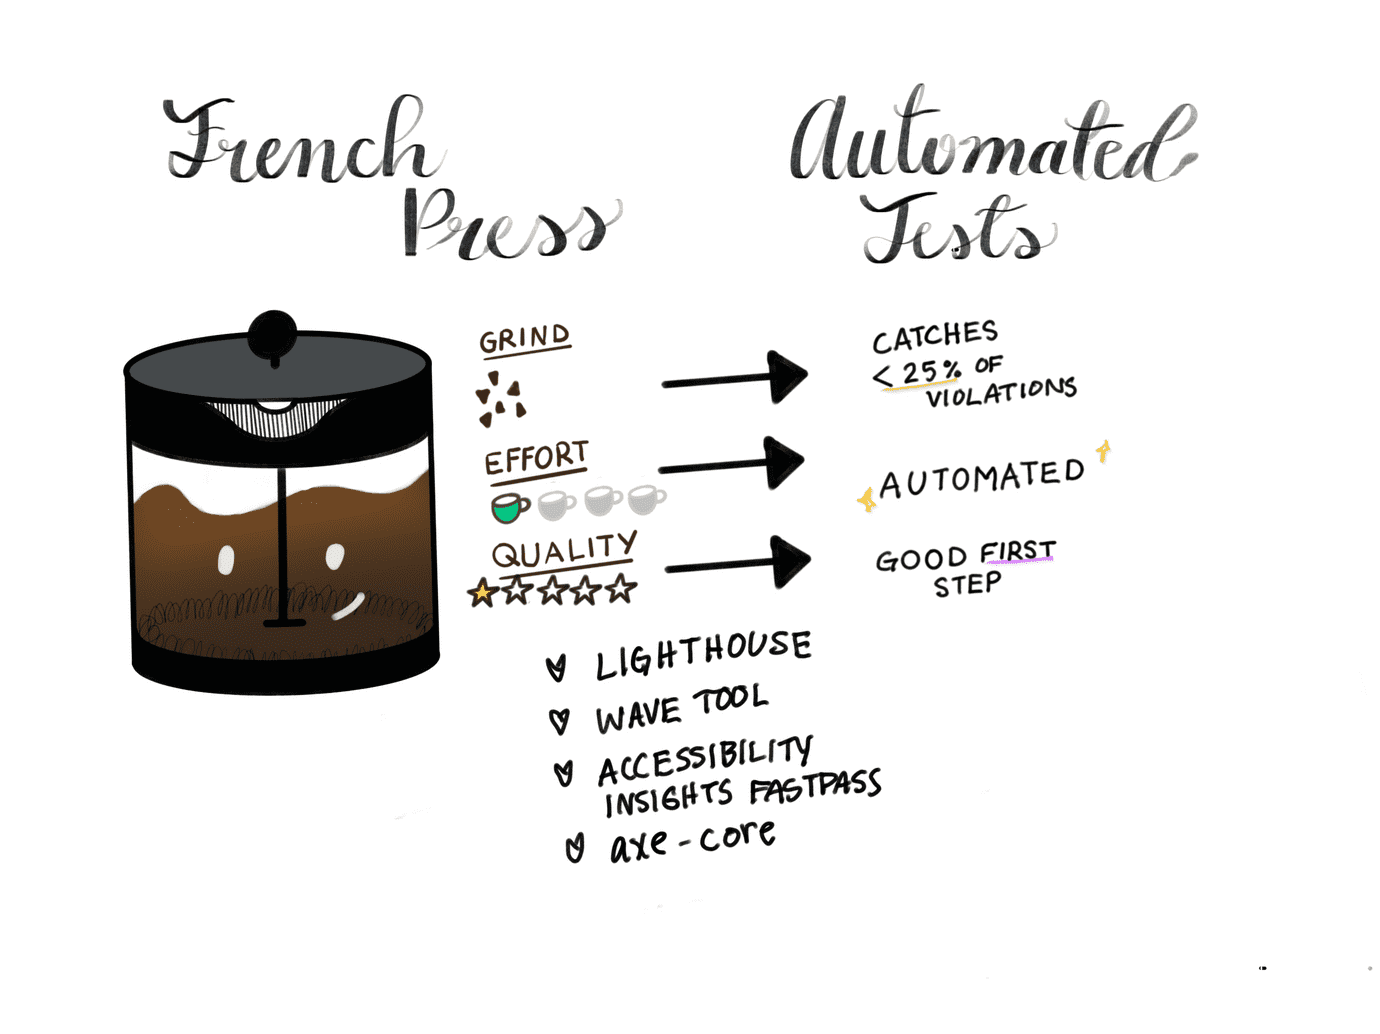 The French Press is **Automated Accessibility Testing**